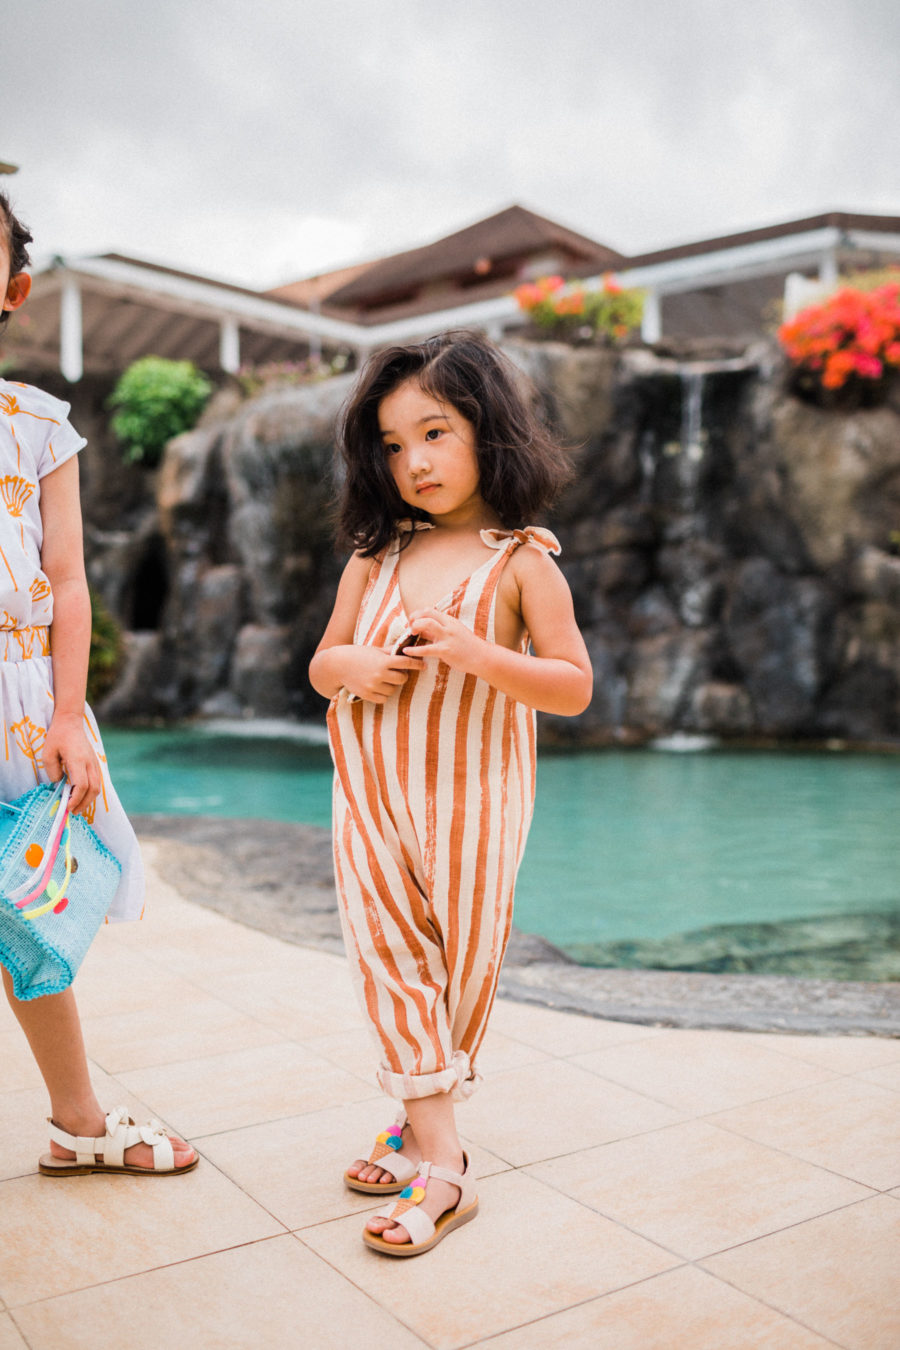 Cute Vacation Outfits for Little Girls, Melijoe kids fashion, fashion blogger family, fashion blogger kids, kids beach style, melijoe kids style, cute swimsuits for kids // Notjessfashion.com